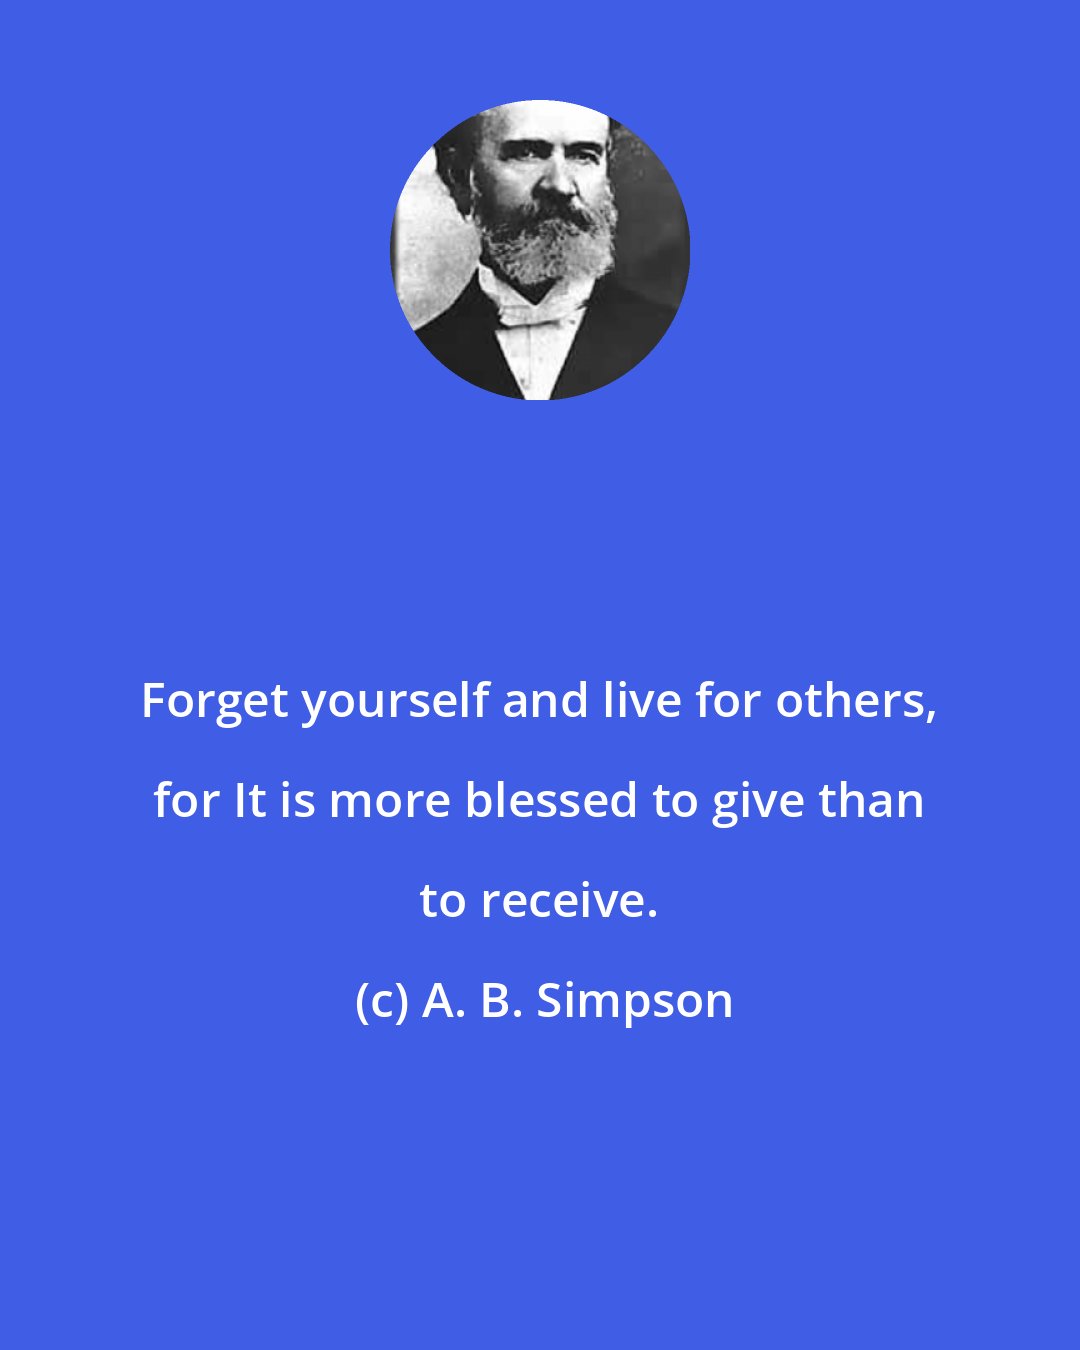 A. B. Simpson: Forget yourself and live for others, for It is more blessed to give than to receive.